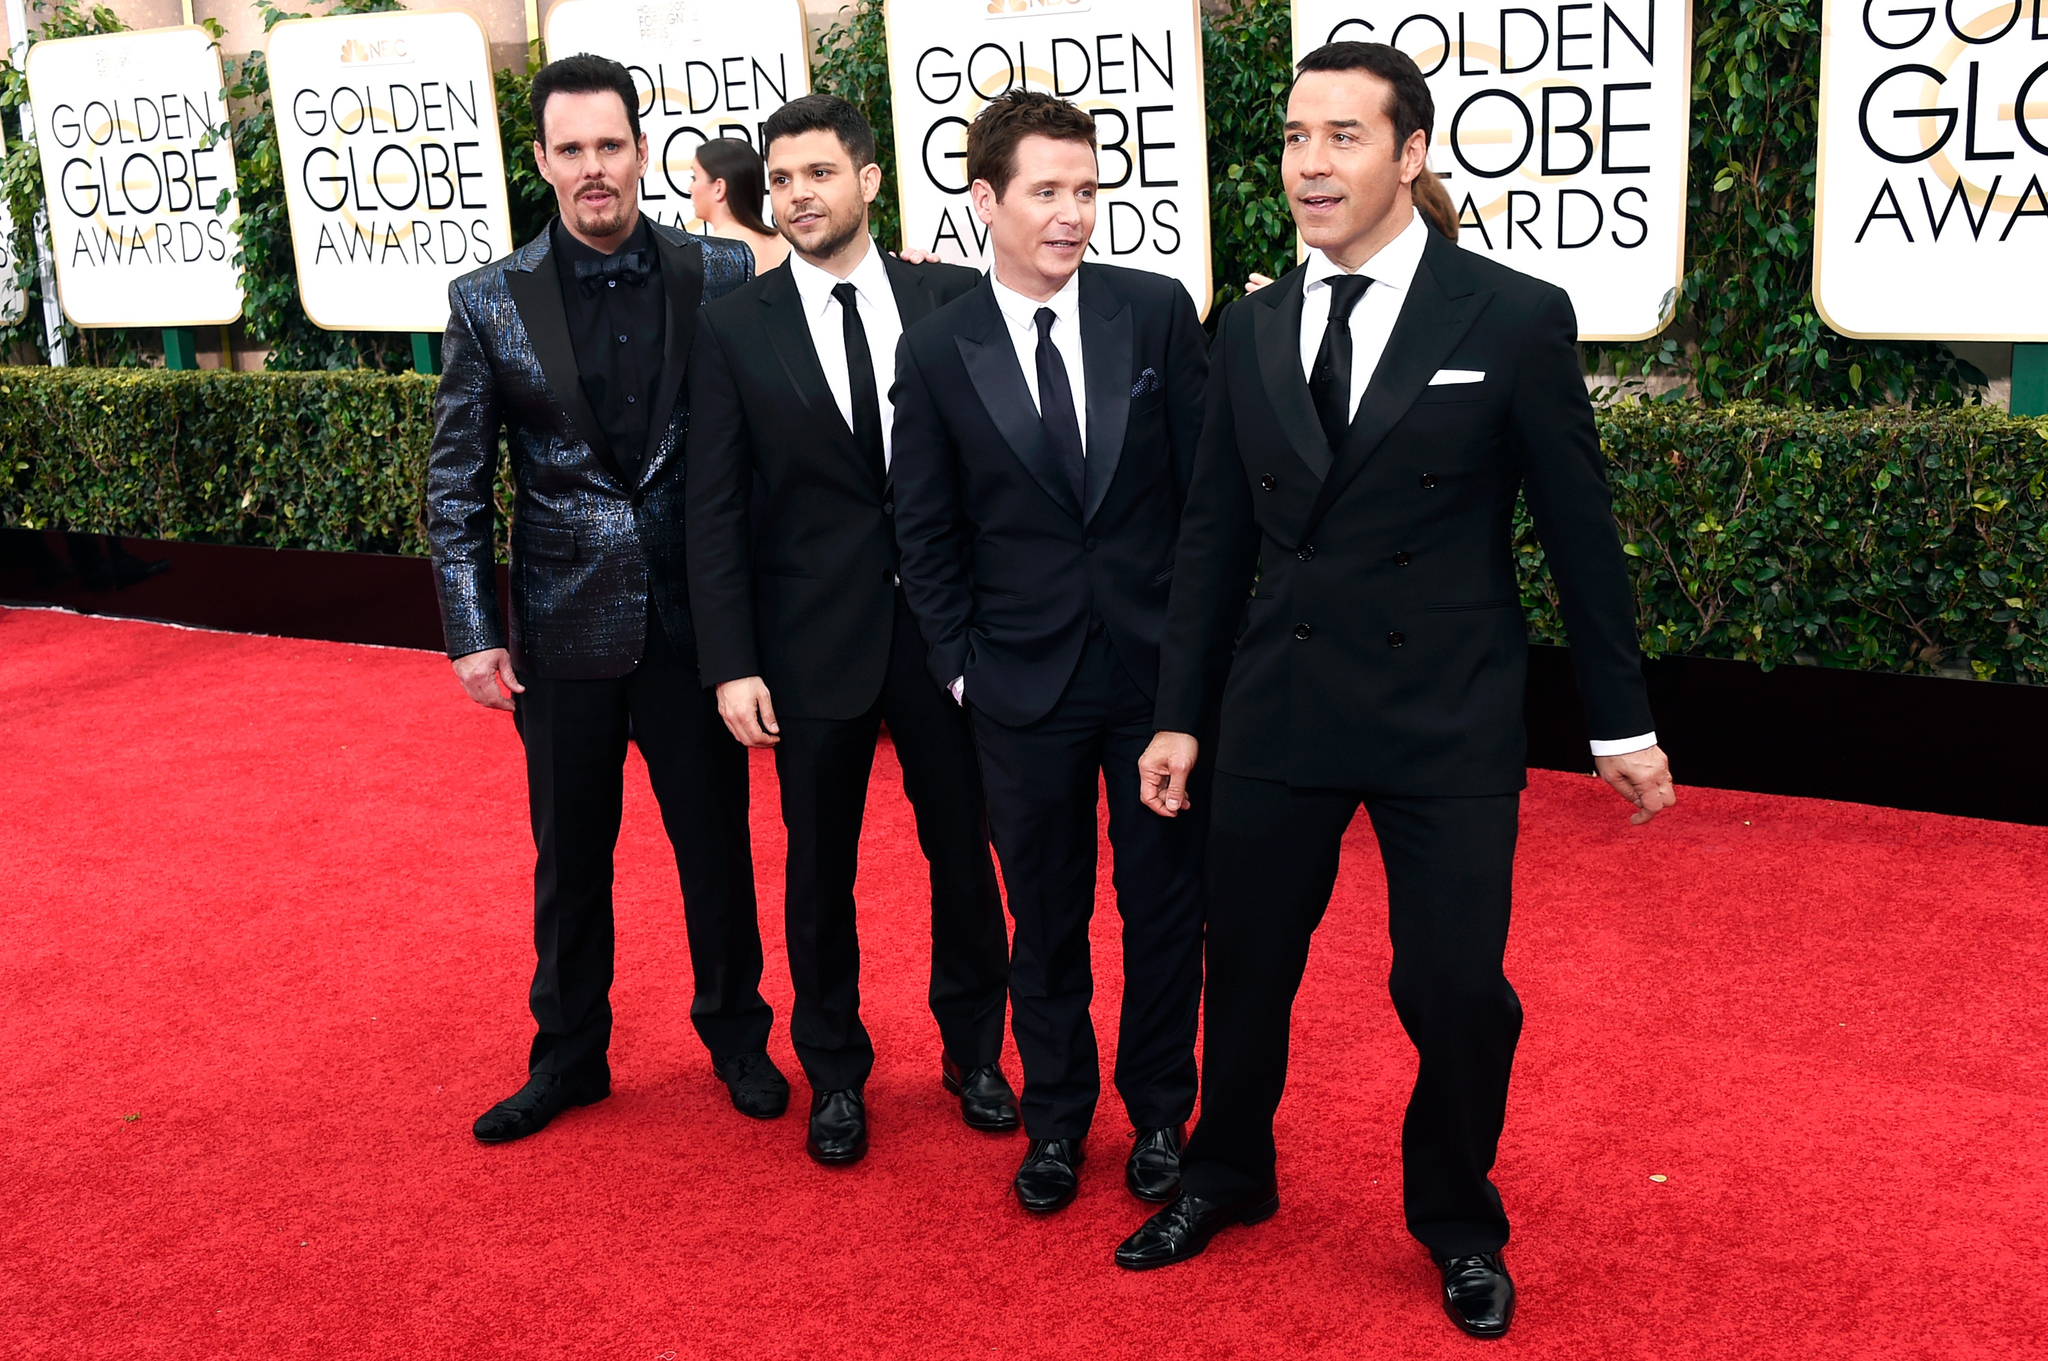 Kevin Dillon, Jeremy Piven, Kevin Connolly and Jerry Ferrara